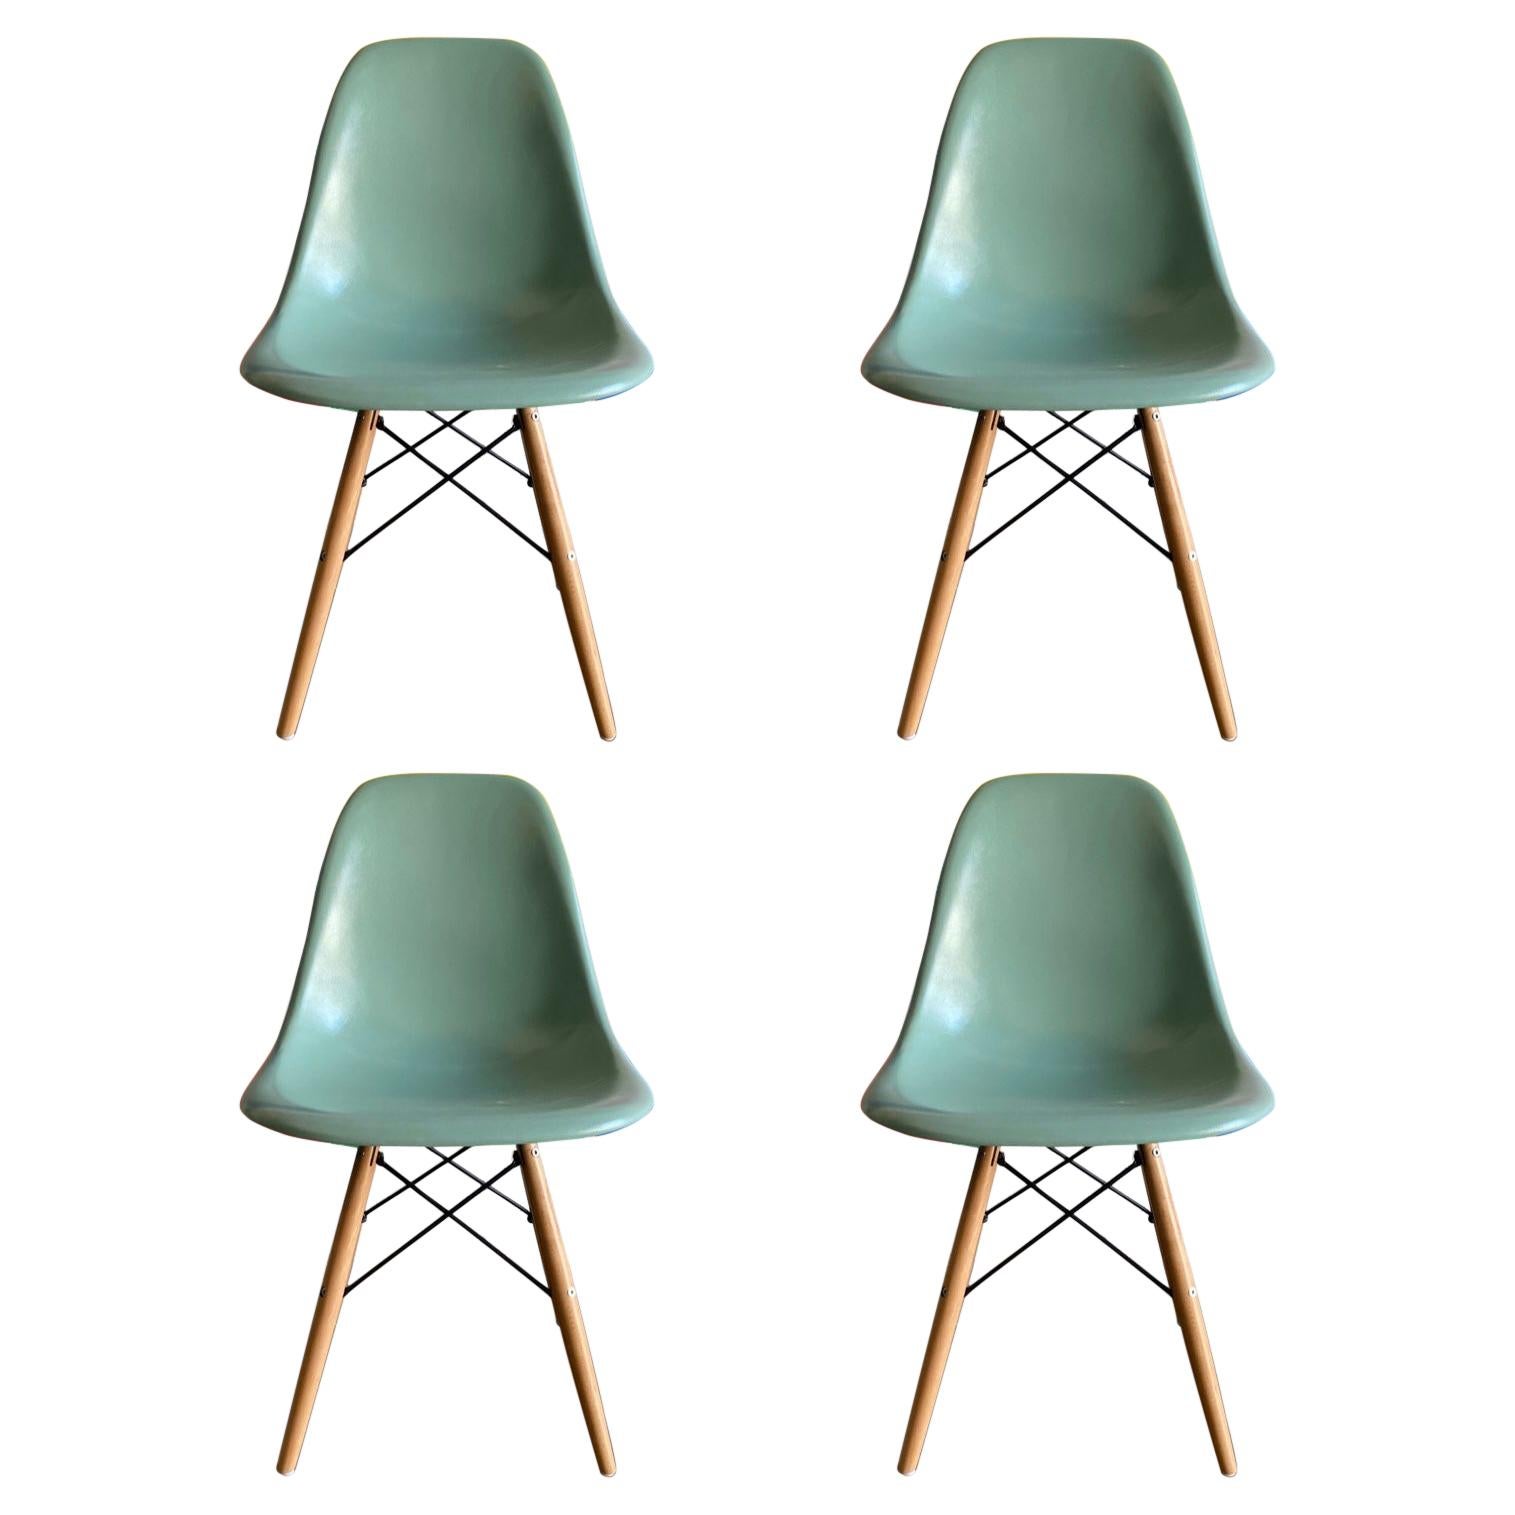 Herman Miller Eames Dining Chairs in Seafoam Green